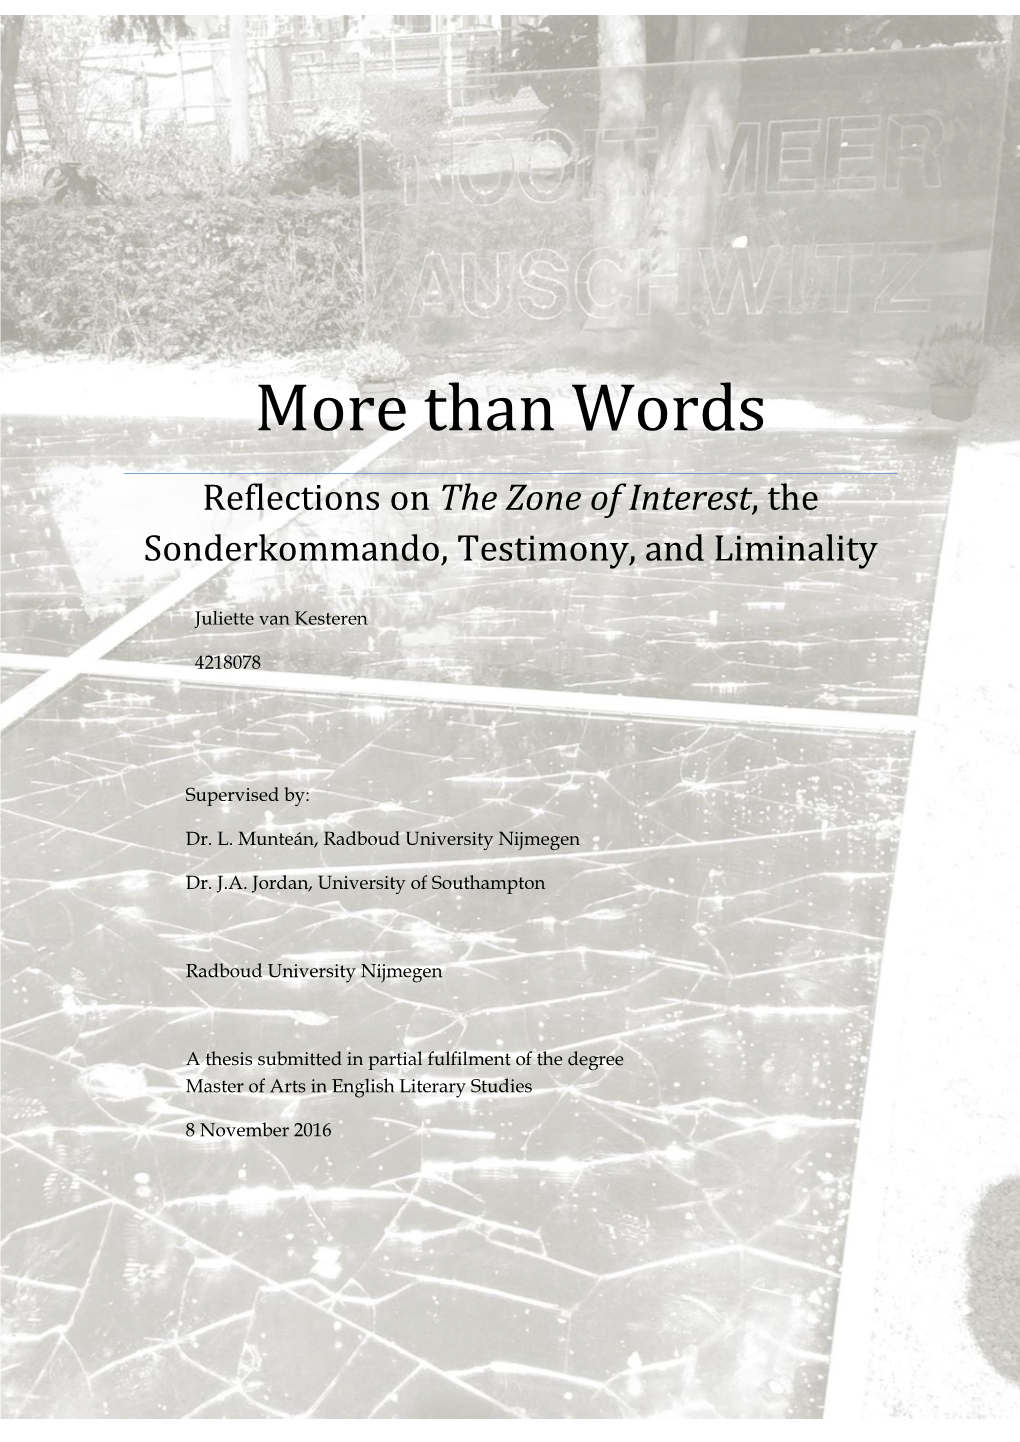 More Than Words Reflections on the Zone of Interest, the Sonderkommando, Testimony, and Liminality